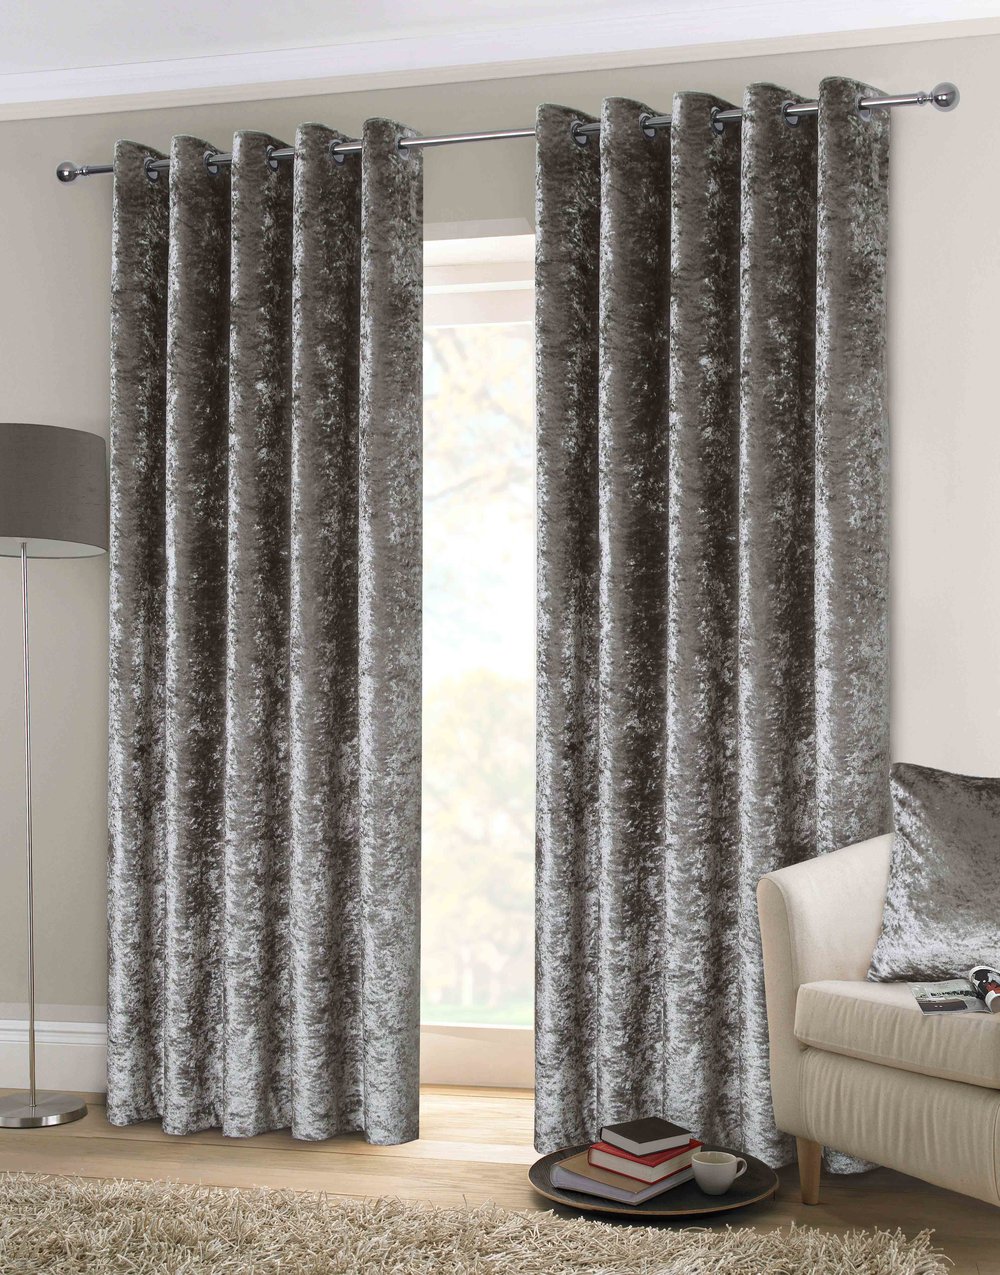 Rapport Luxury Fully Lined Palermo Eyelet Curtains Natural/Mink 4Sizes Available